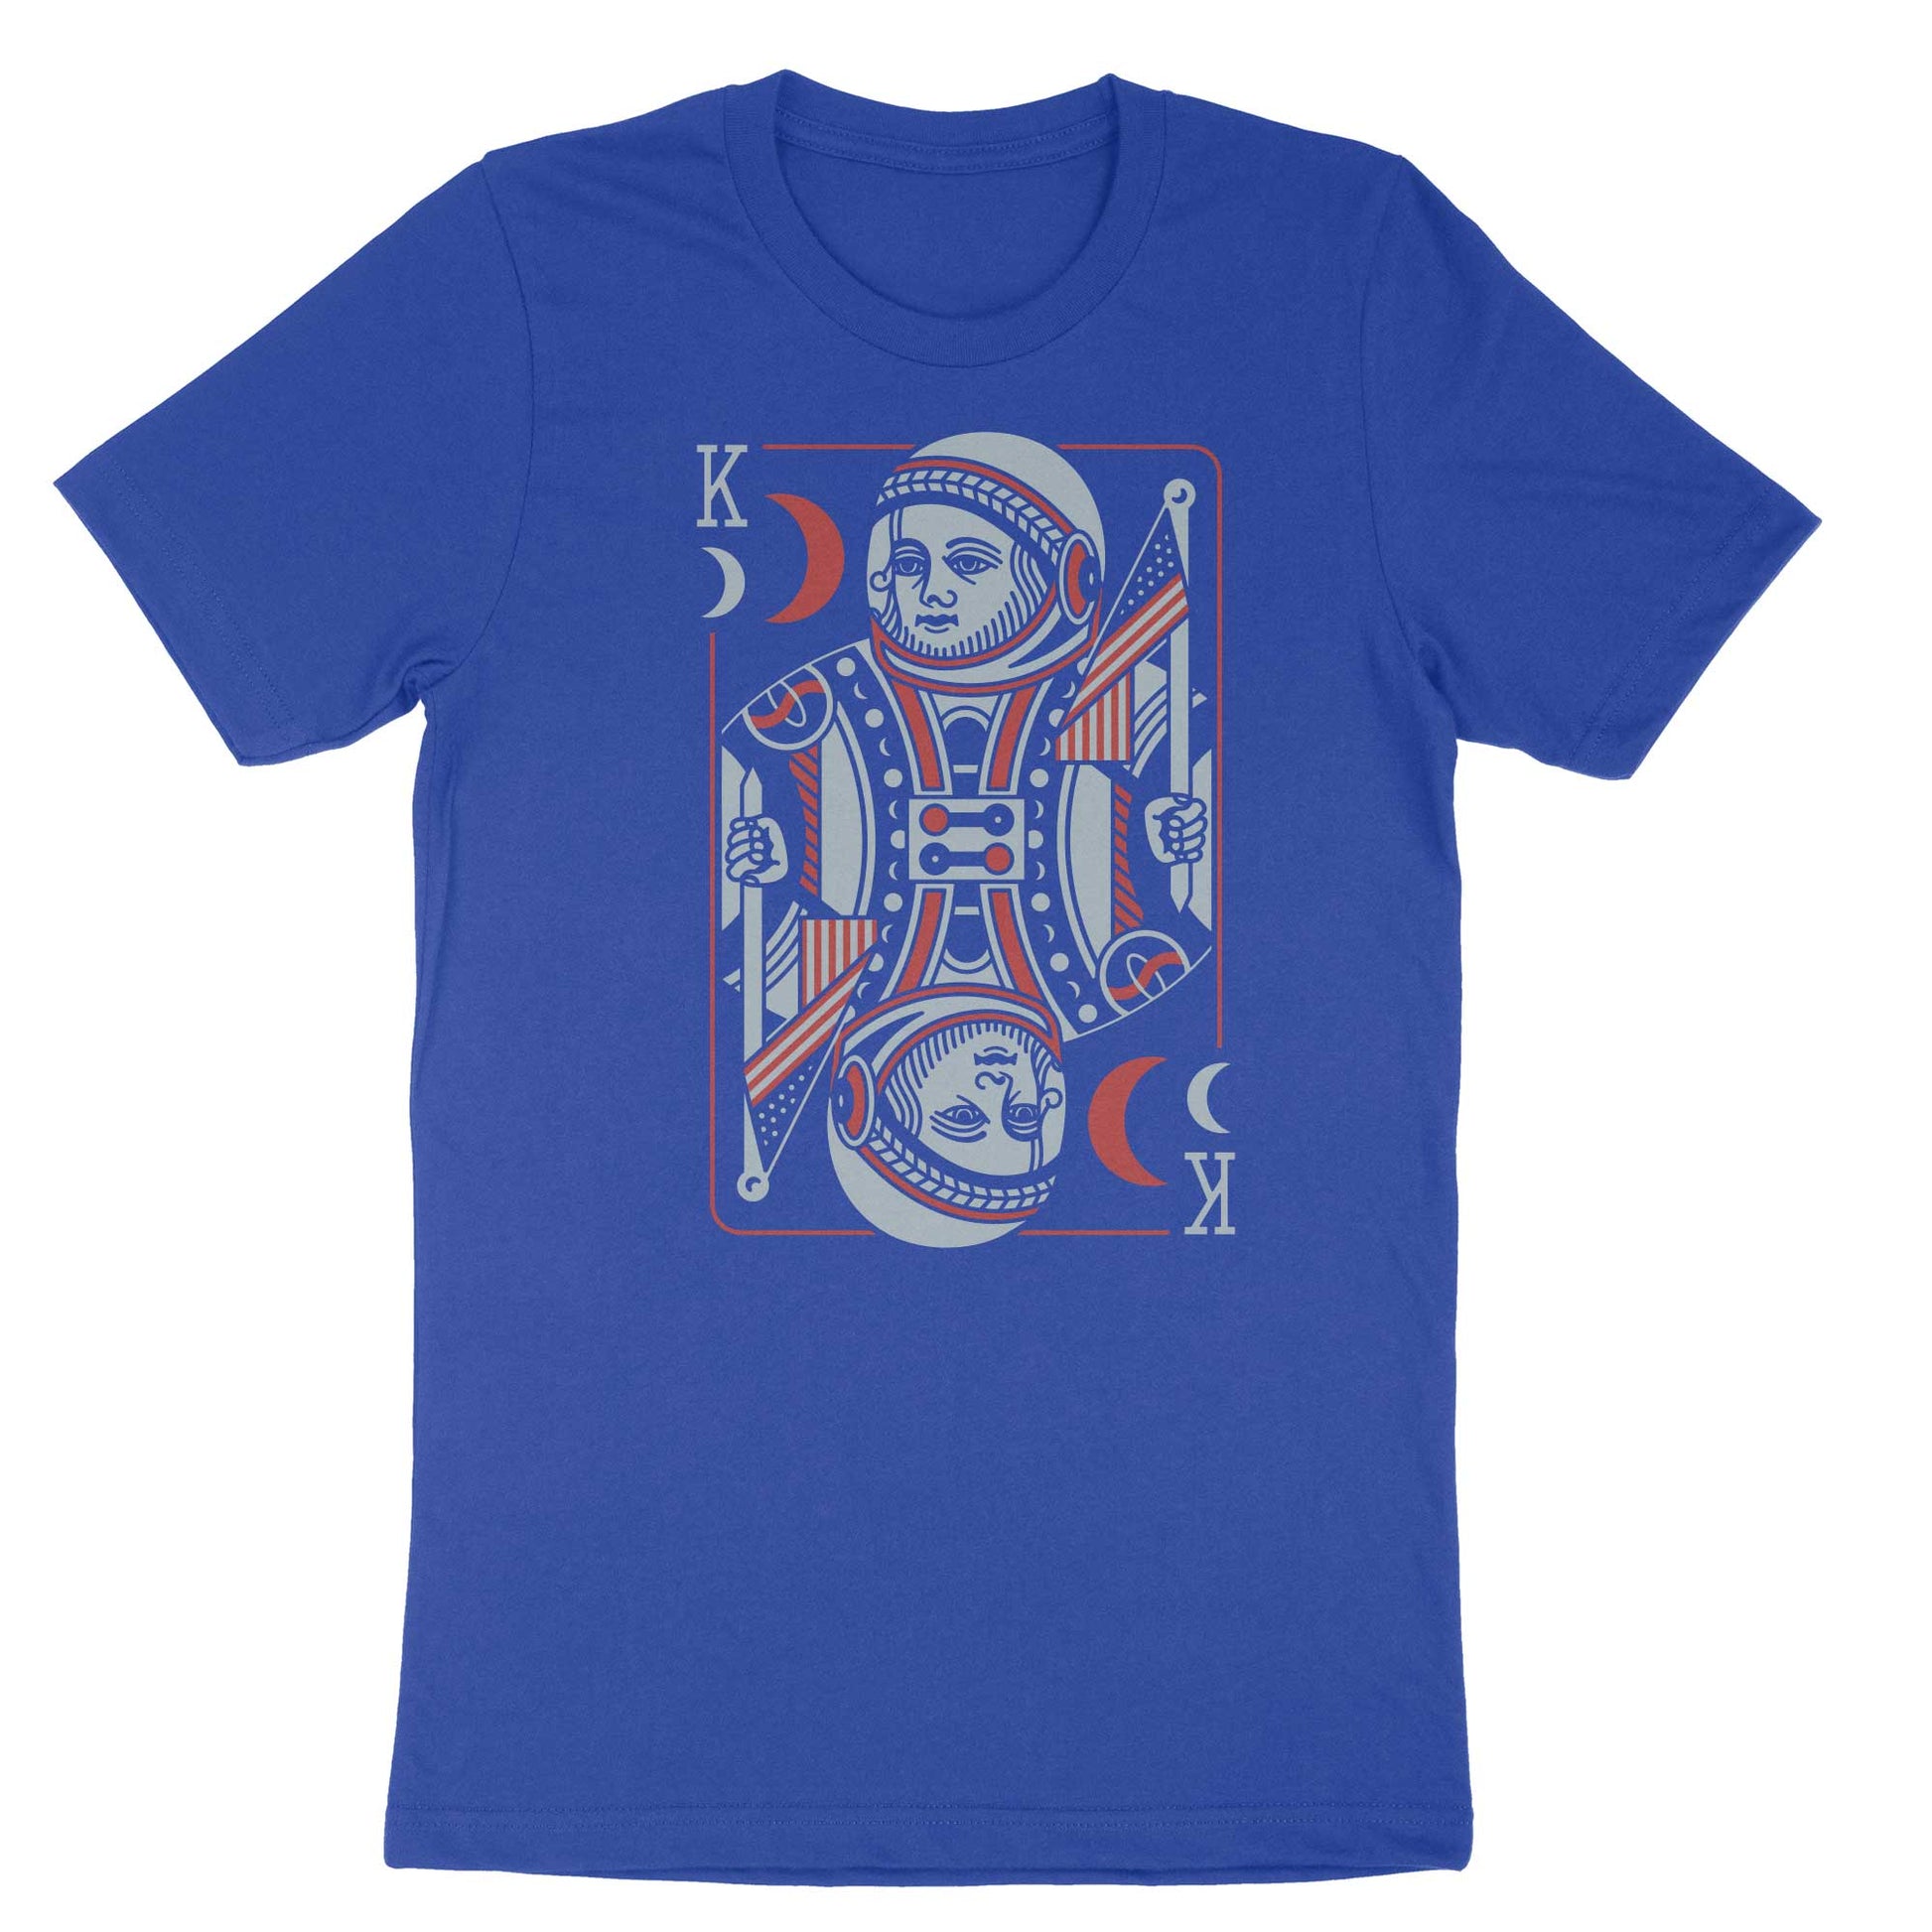 Image of "King of Moons" playing card on blue t-shirt